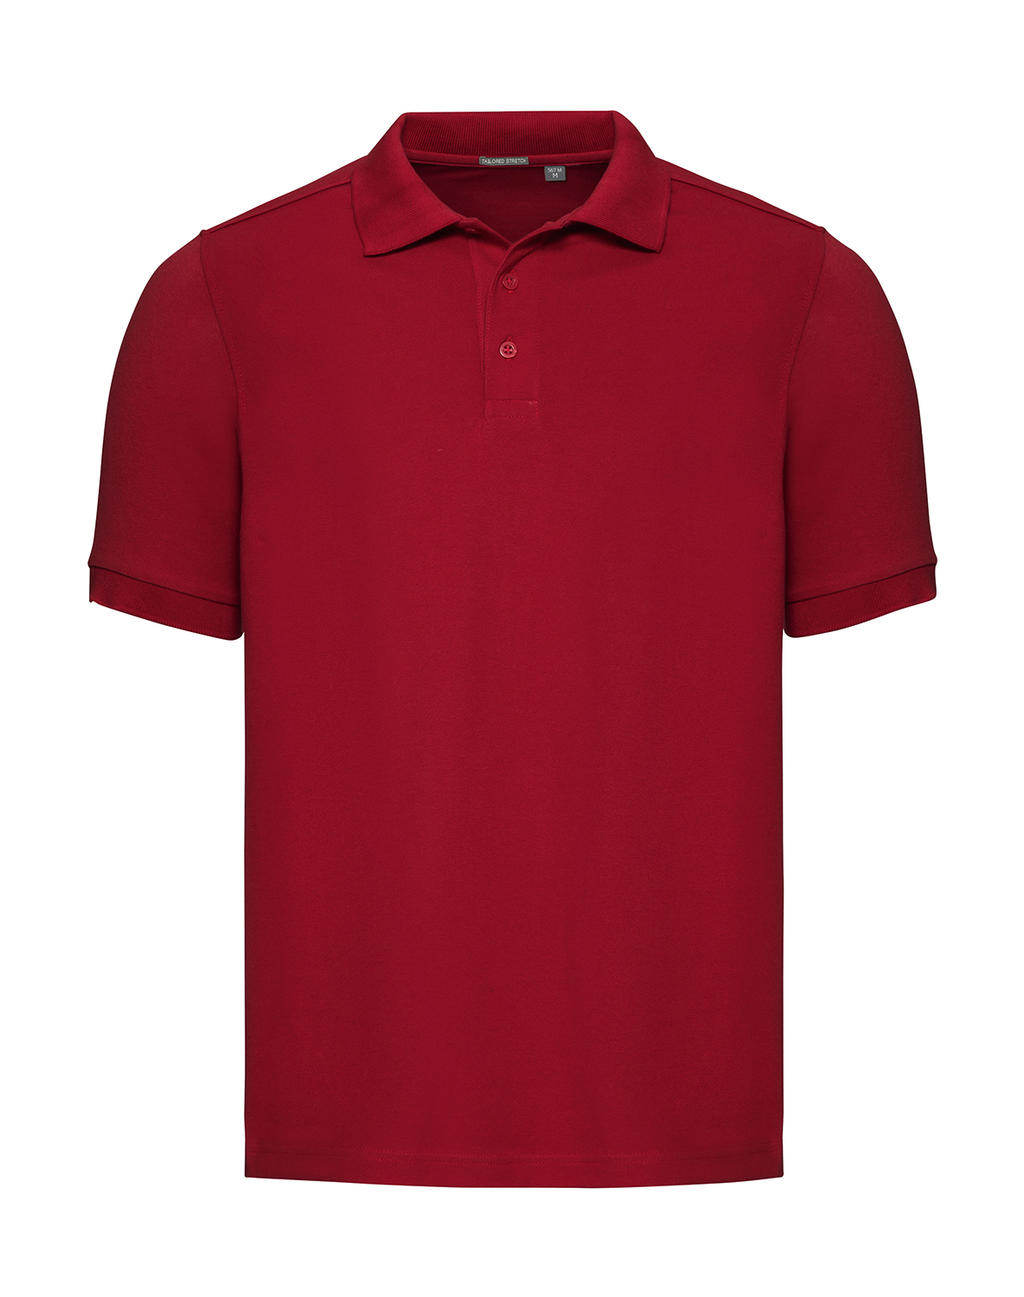  Mens Tailored Stretch Polo in Farbe Classic Red